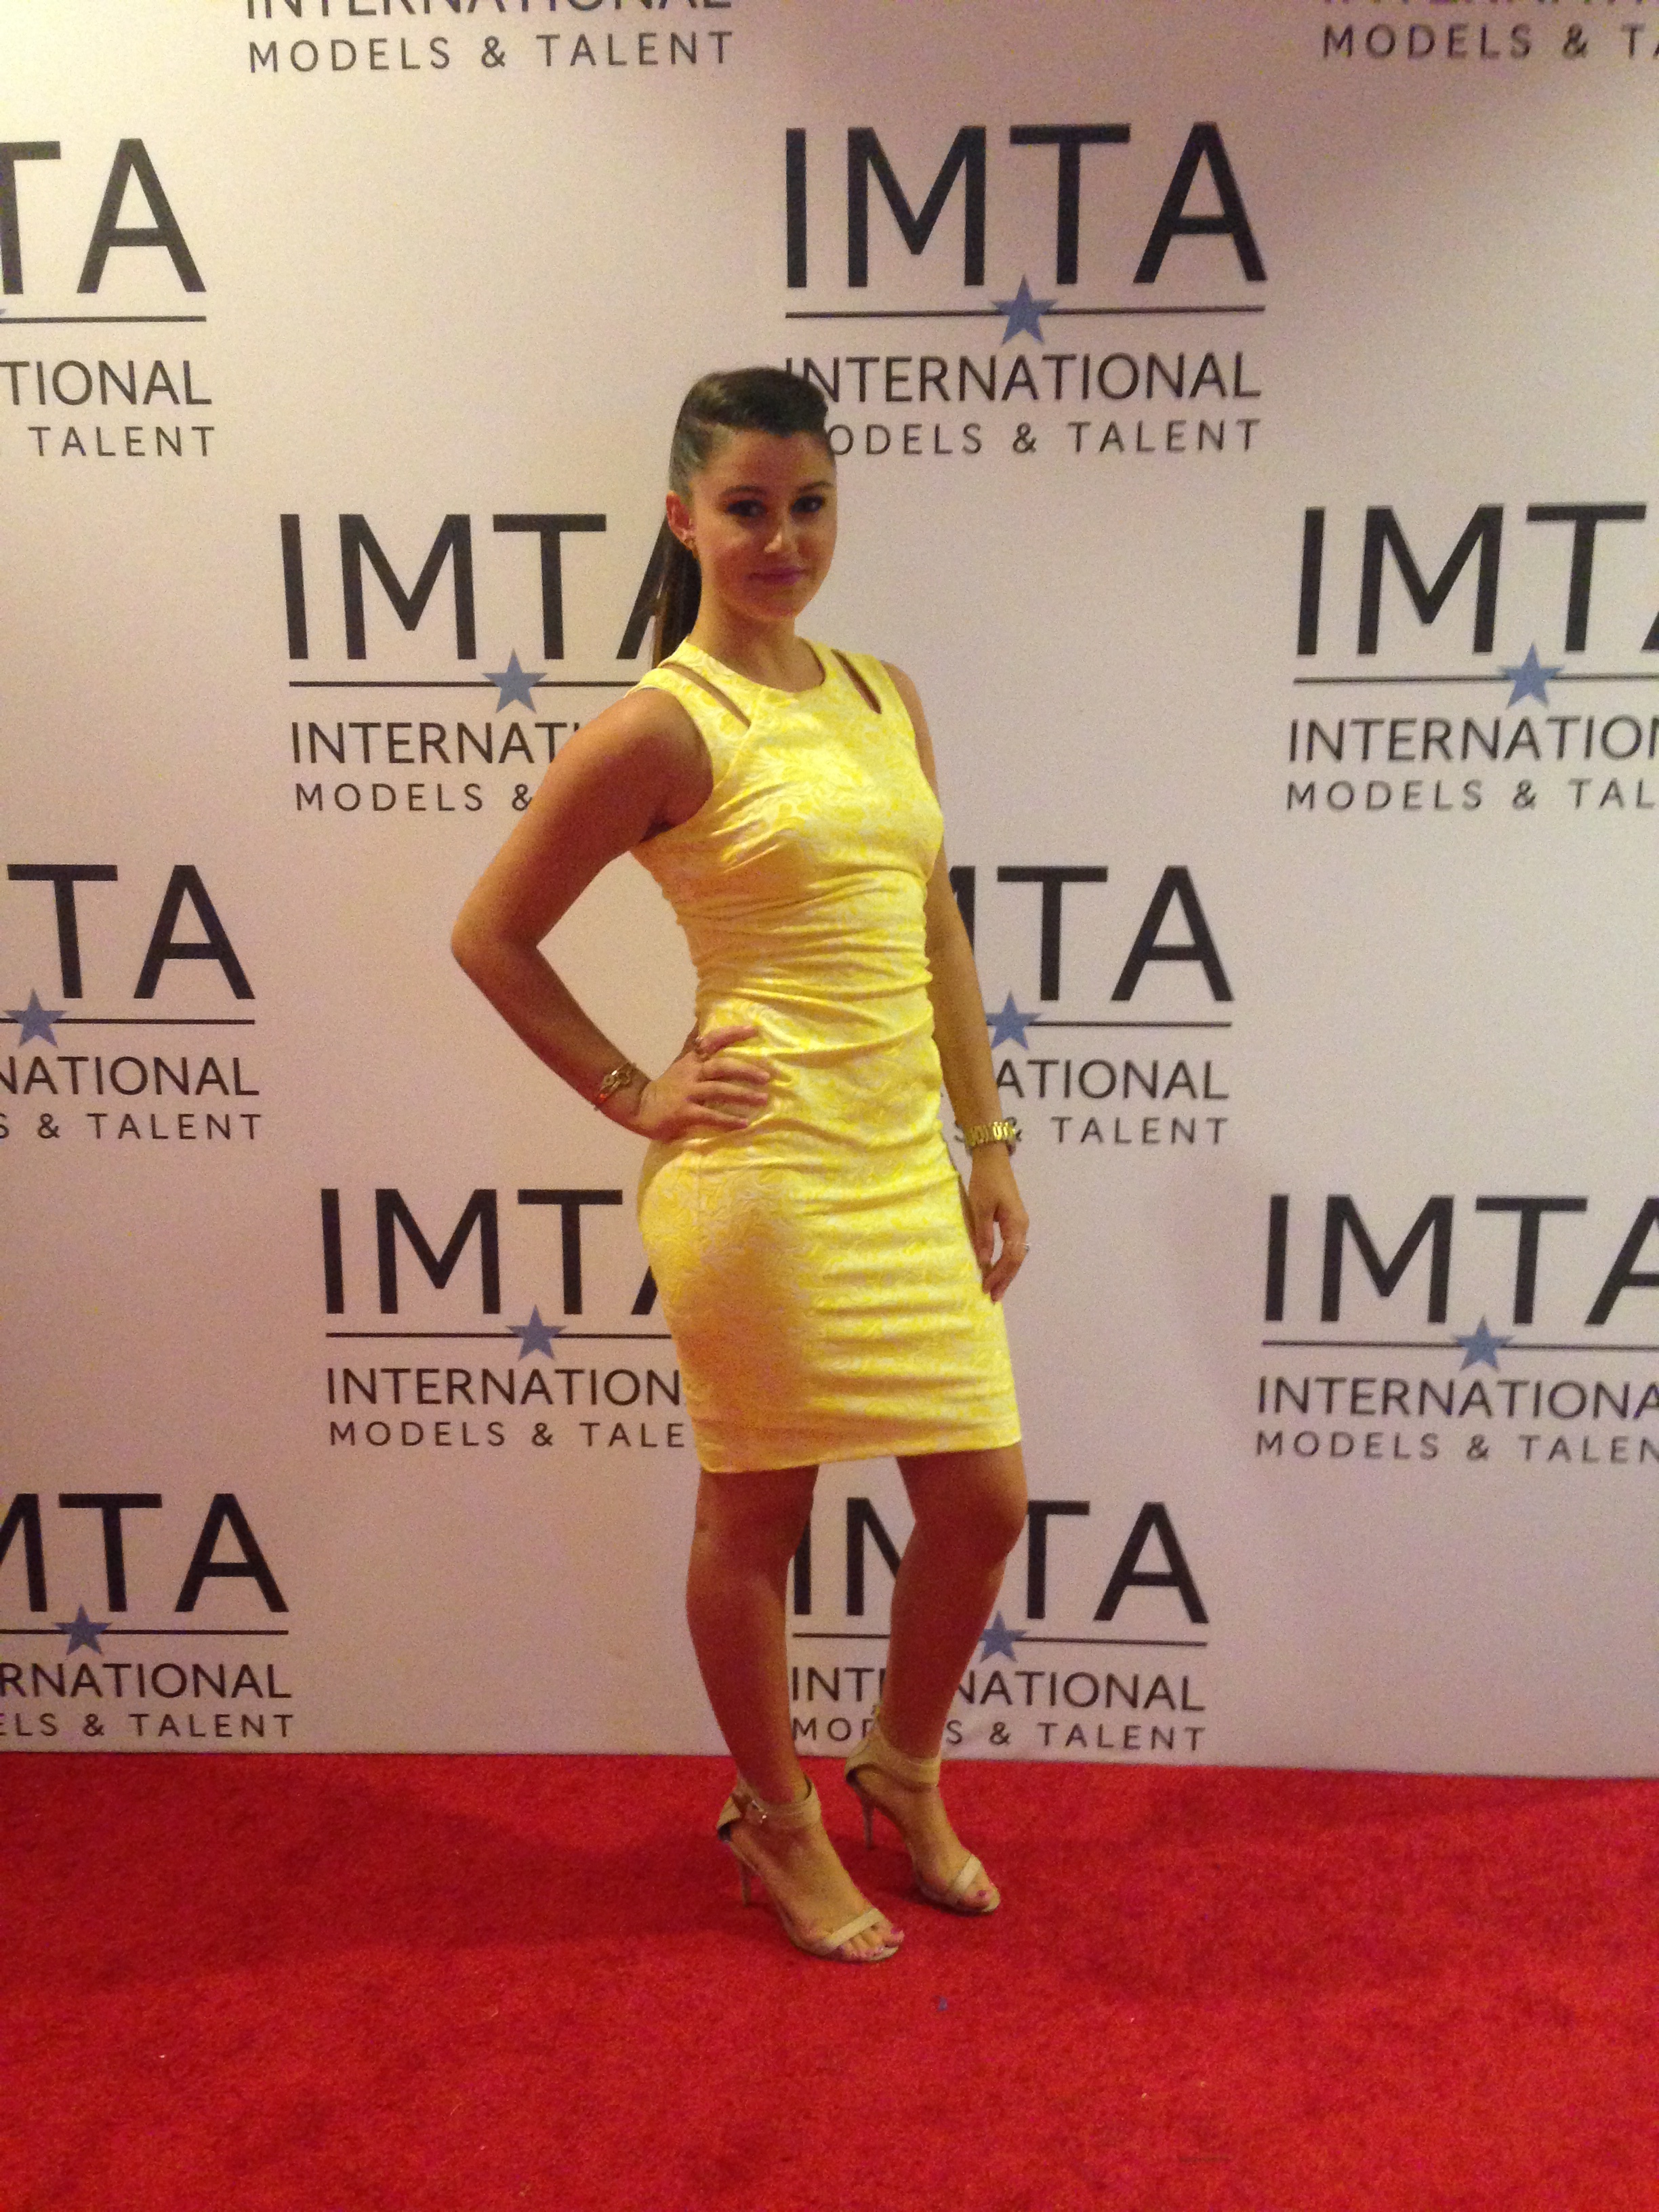 Courtney Baxter attending IMTA NY 2014 as a special guest.